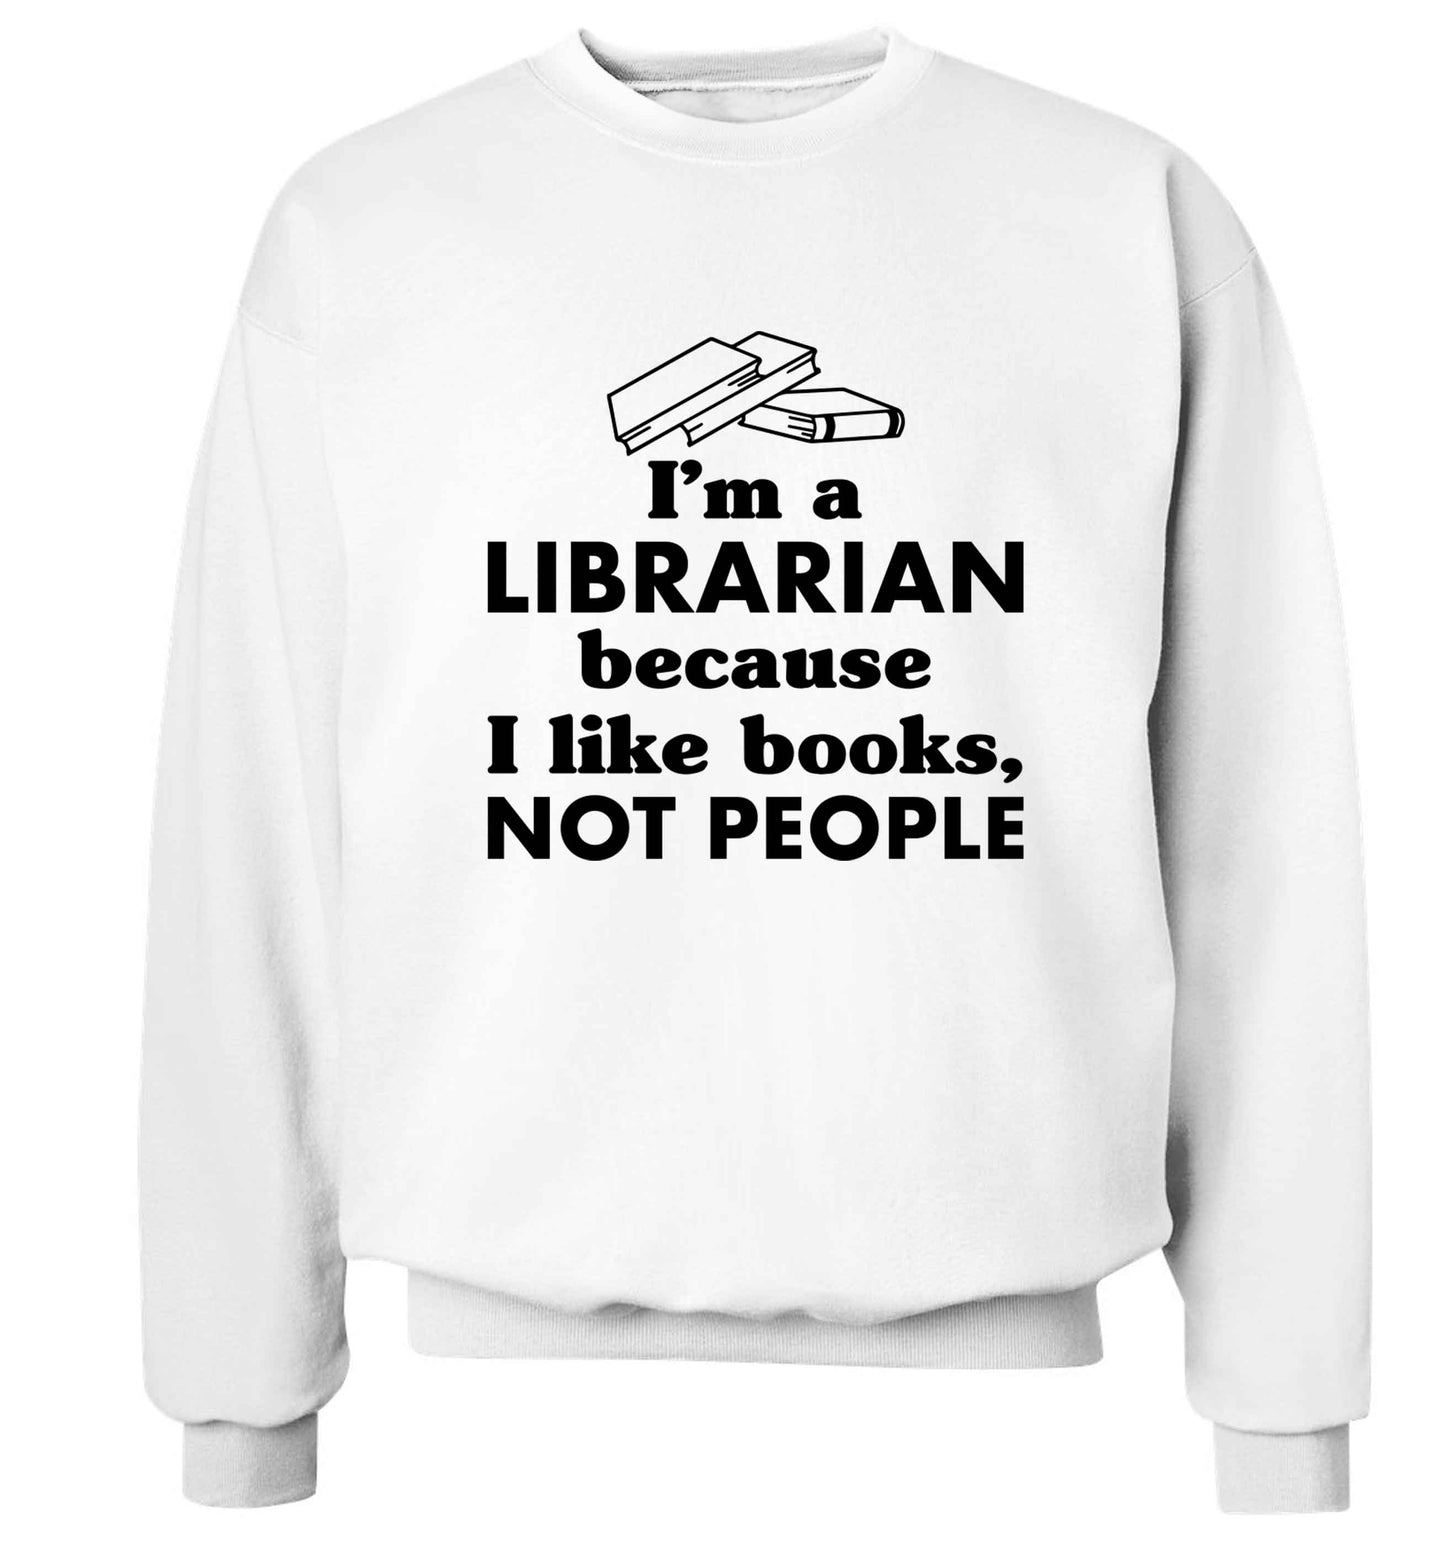 I'm a librarian because I like books not people Adult's unisex white Sweater 2XL